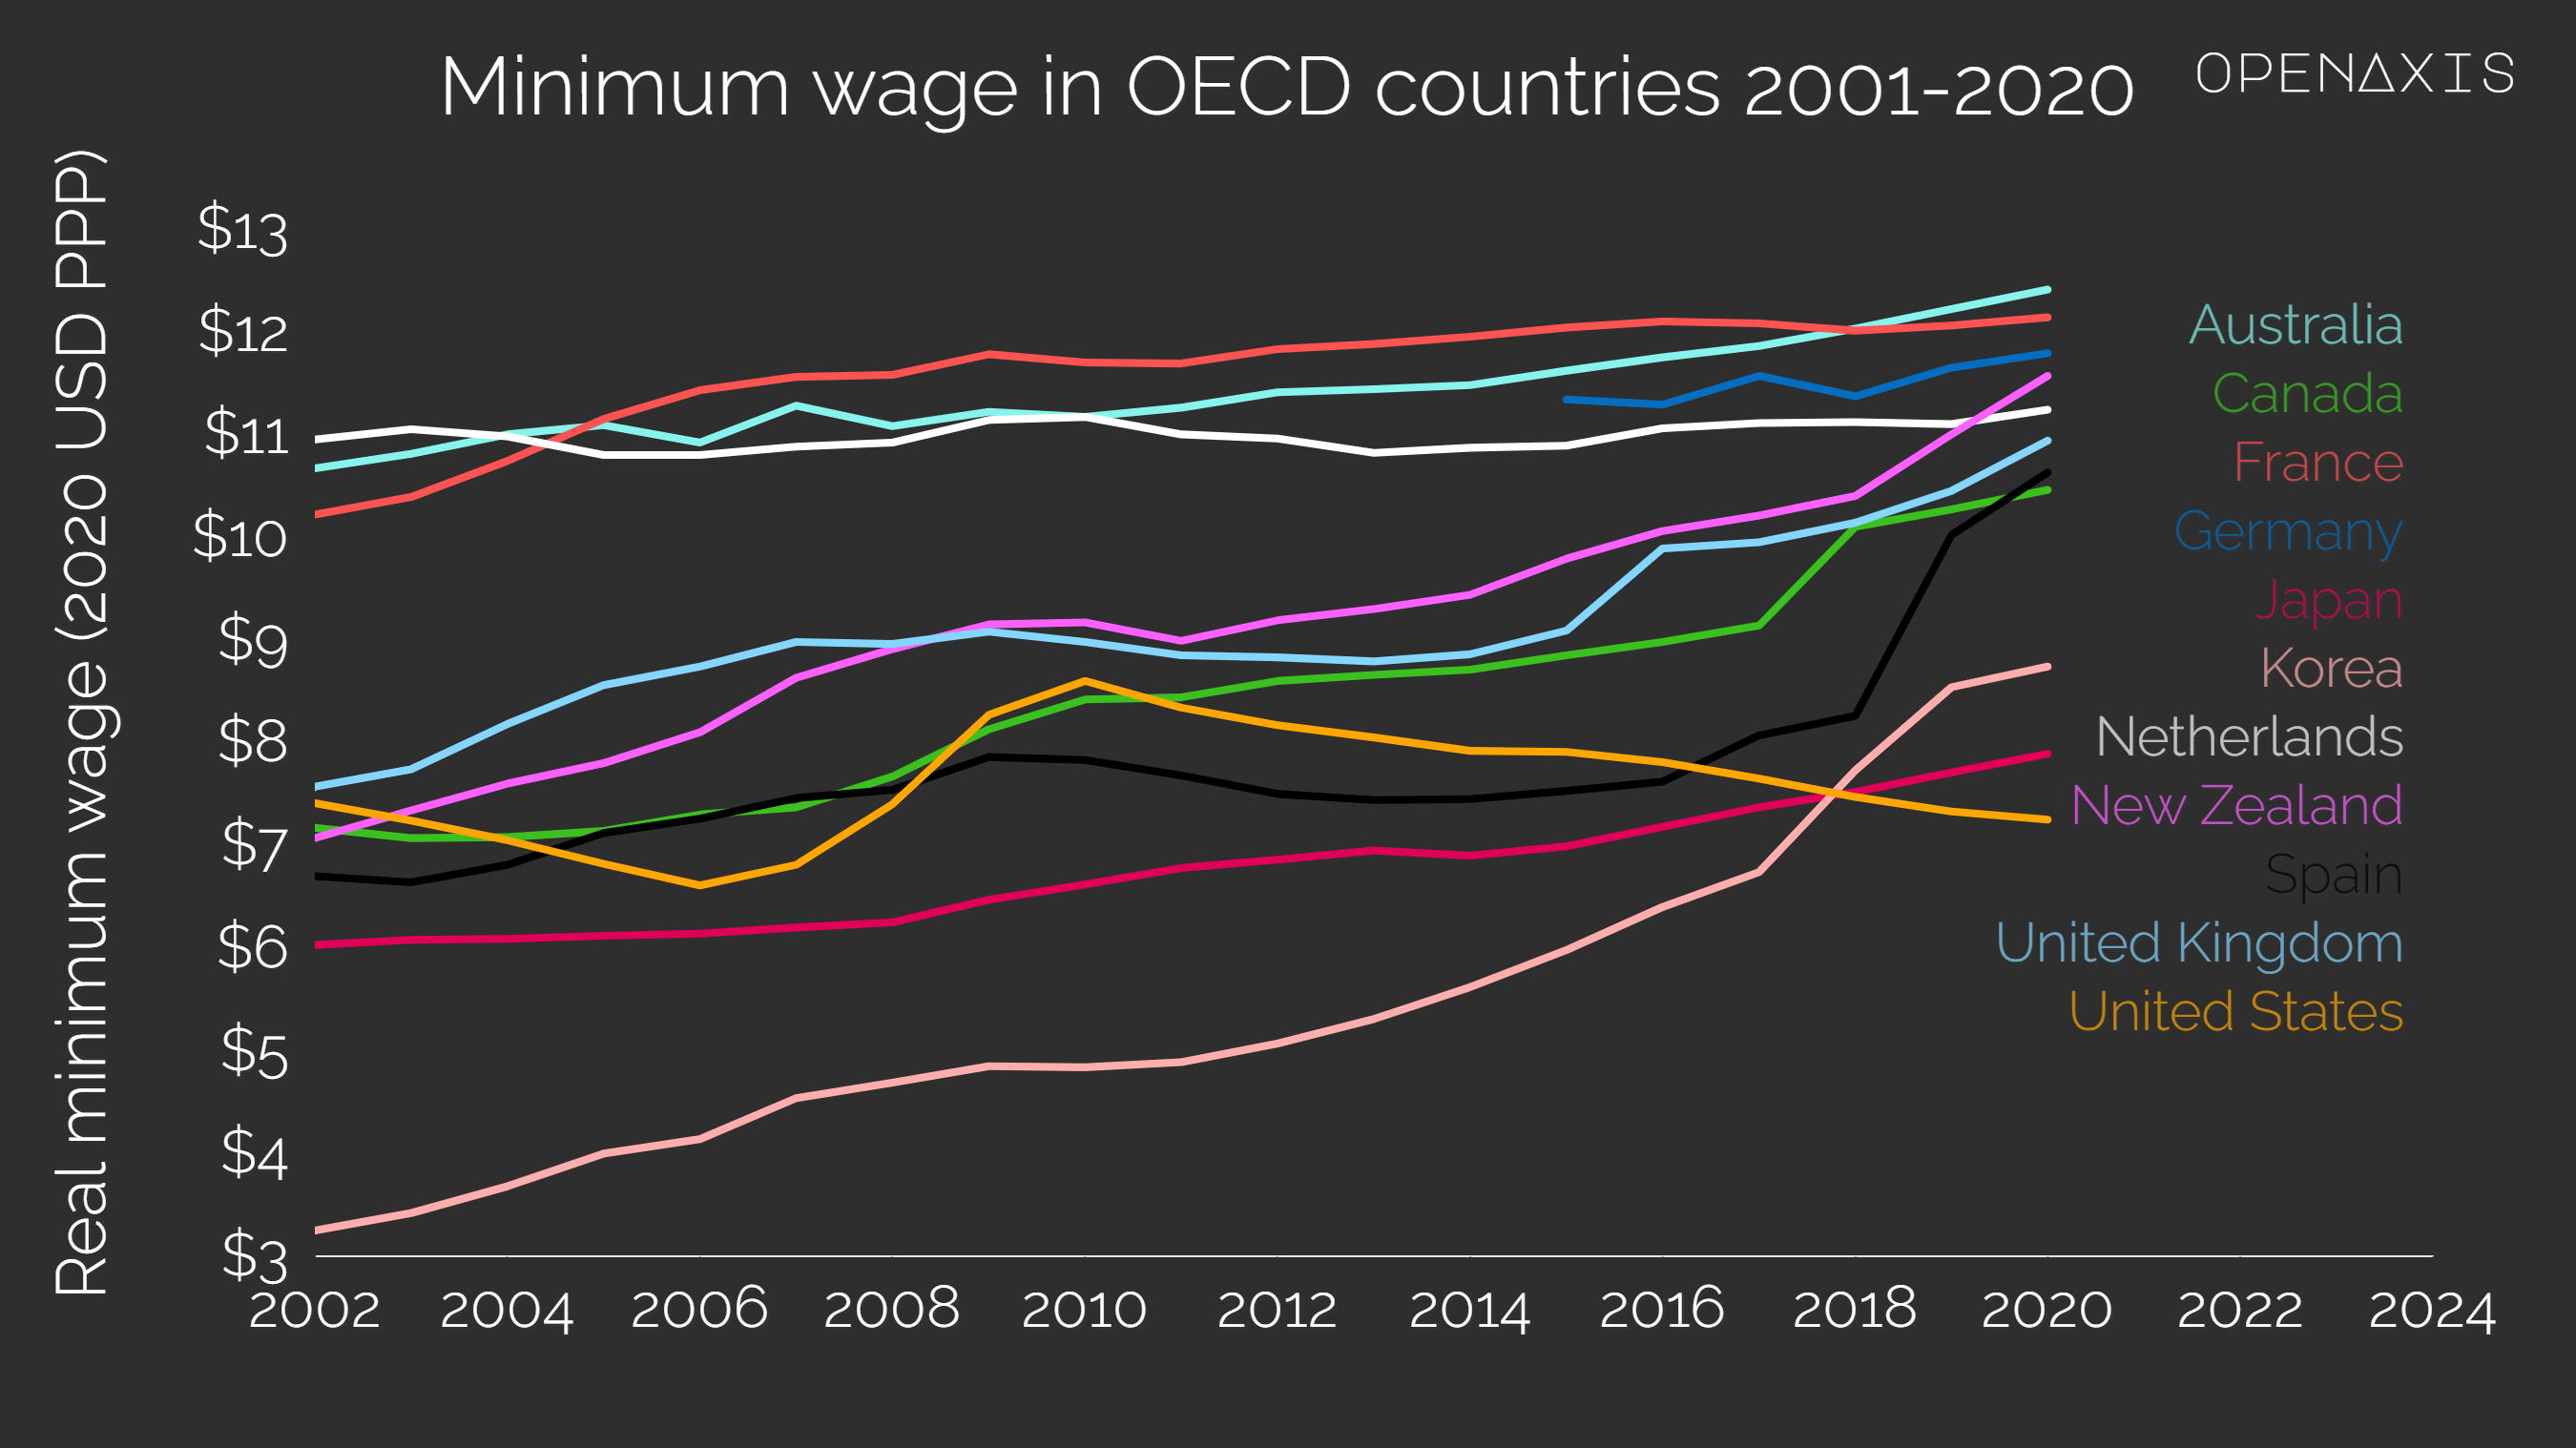 "Minimum wage in OECD countries 2001-2020"